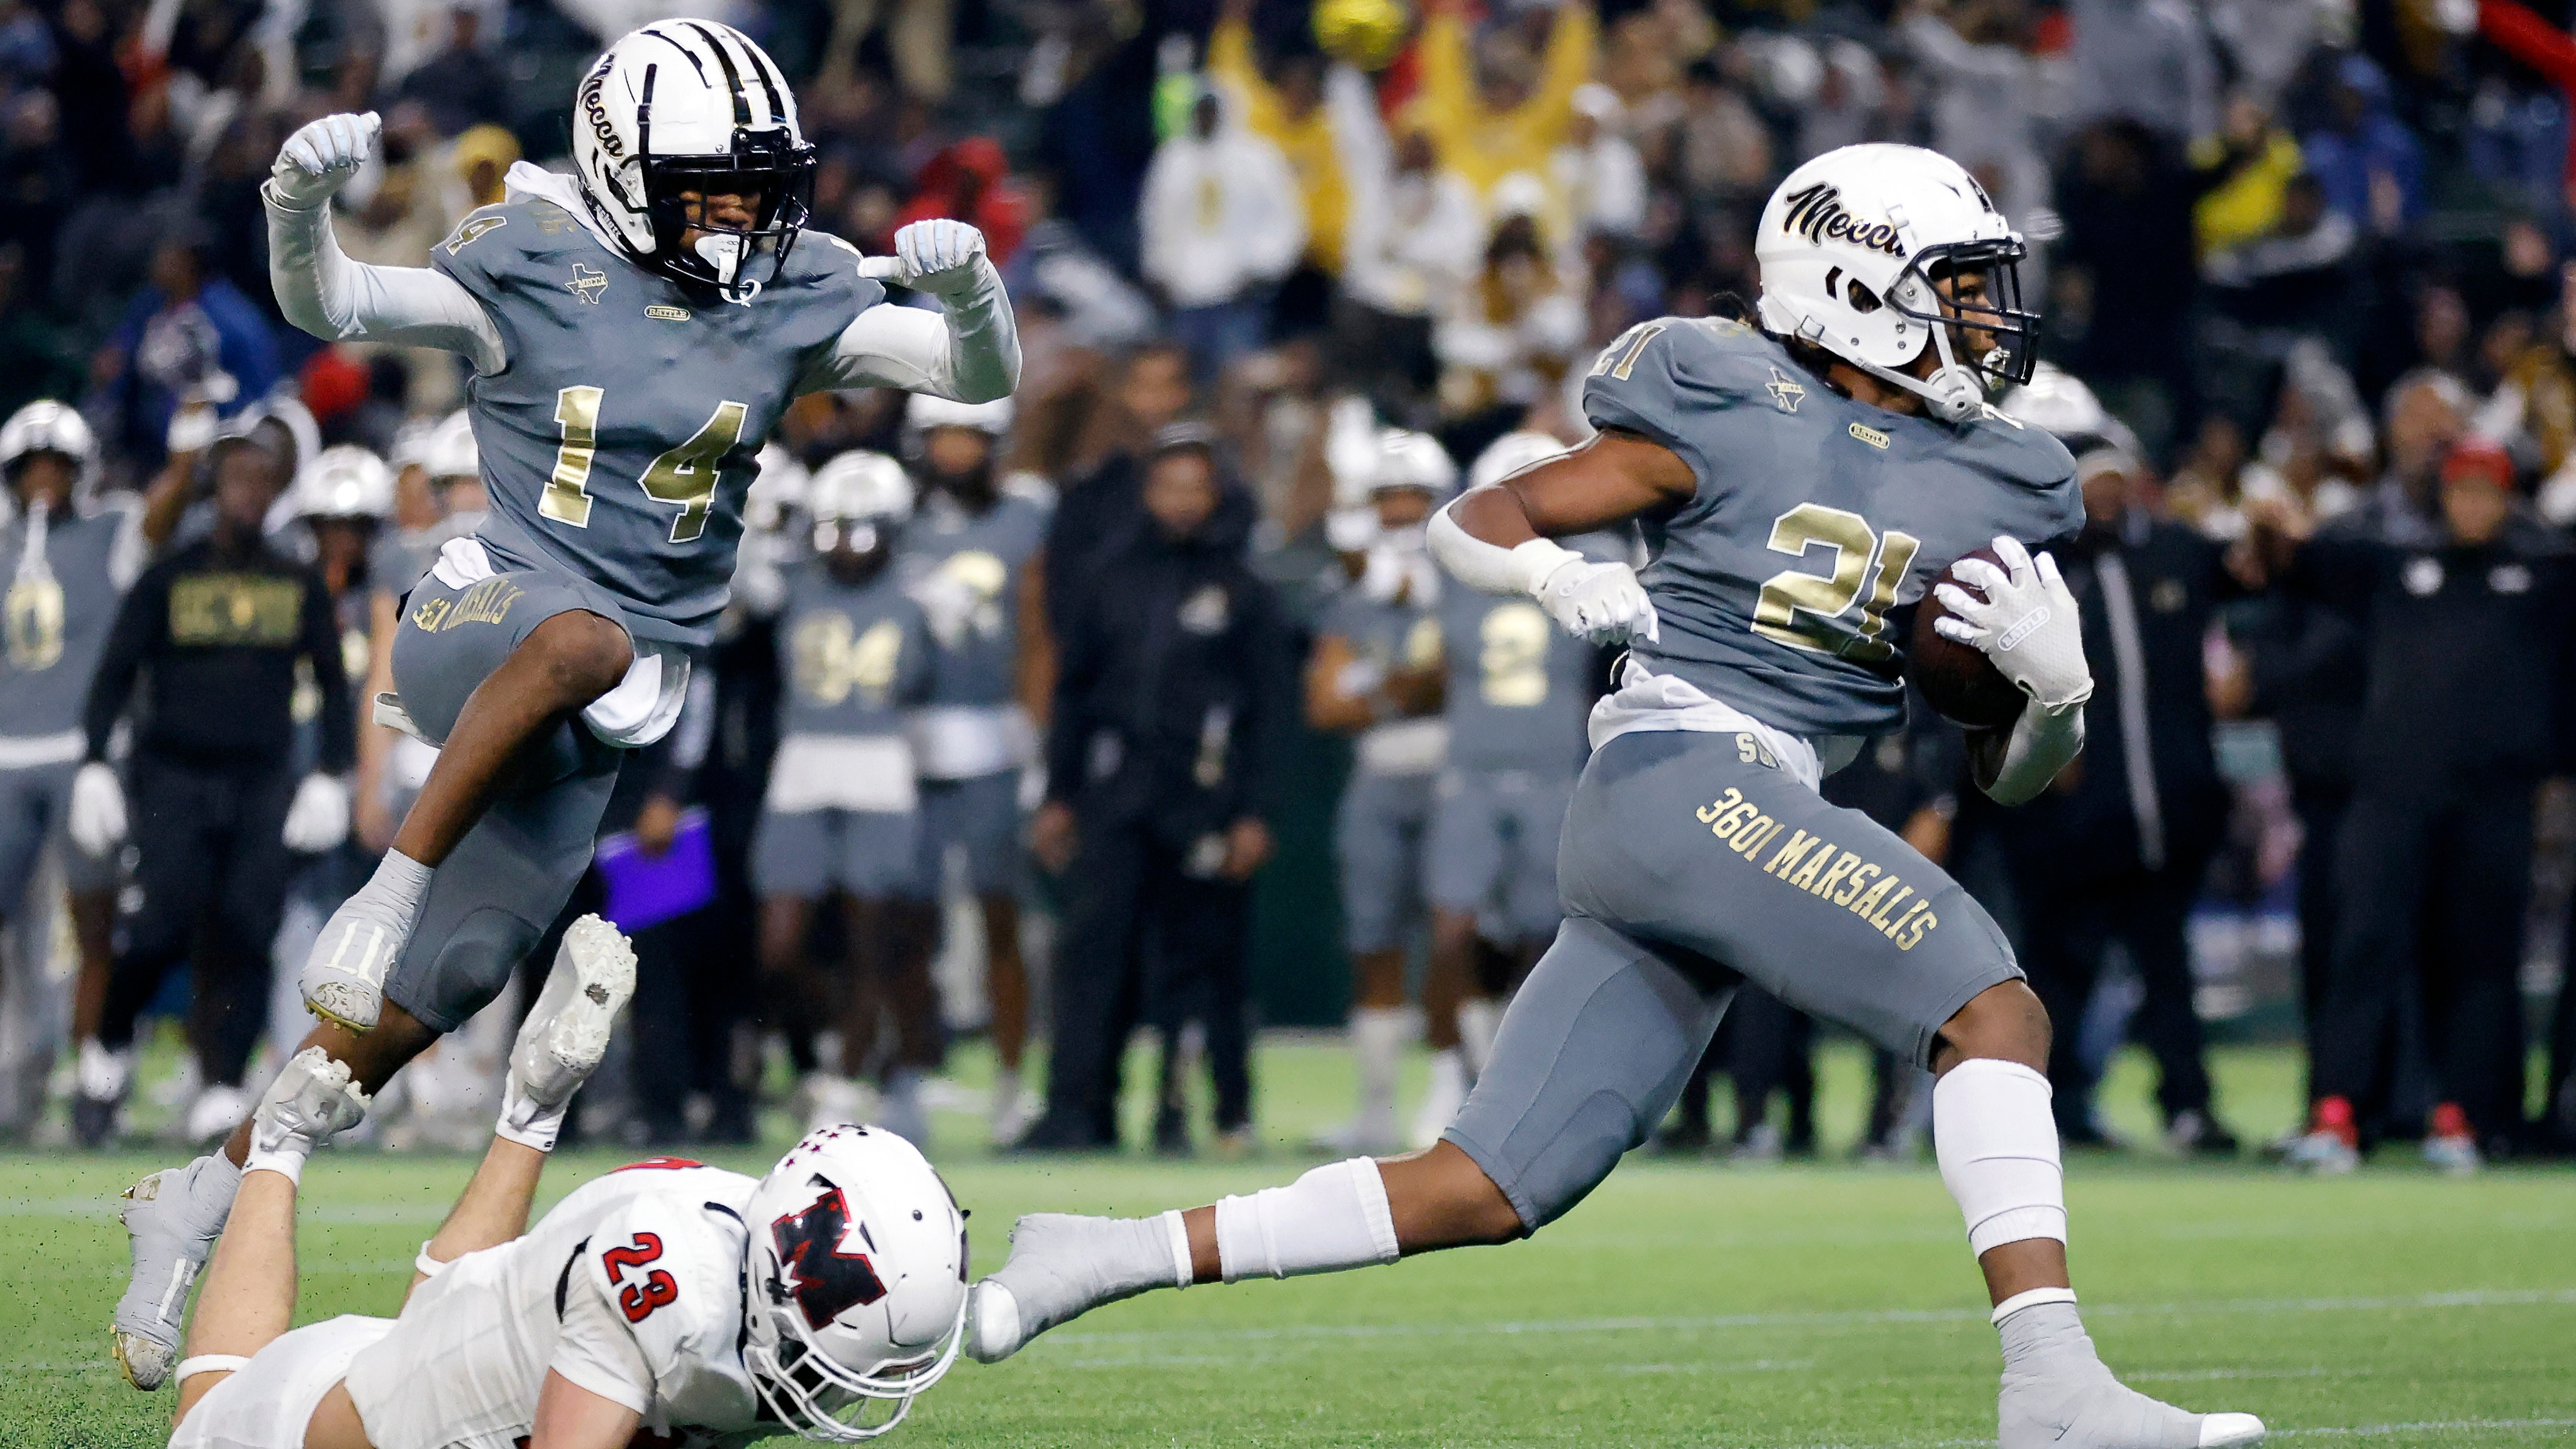 Life on the edge South Oak Cliff takes down Melissa, survives another close playoff game picture